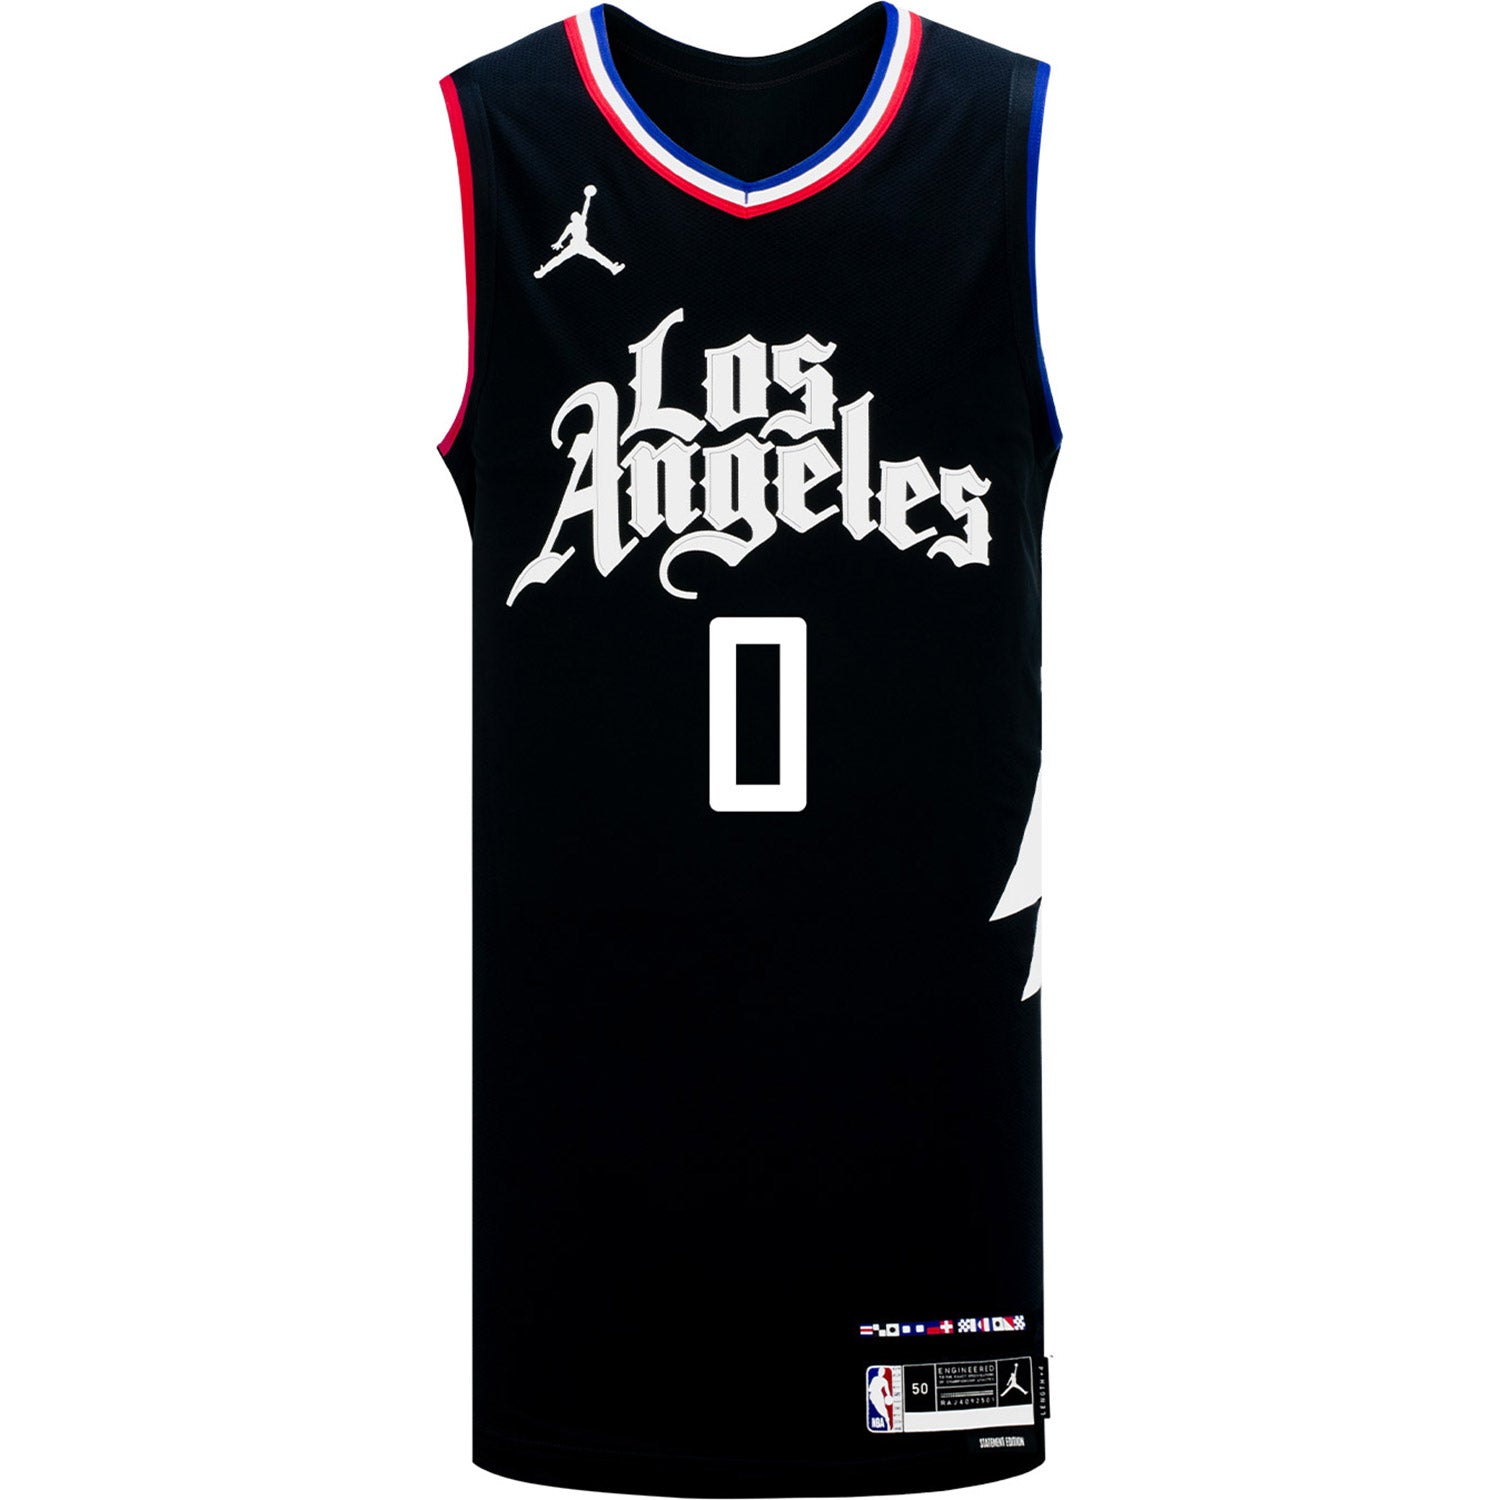 NBA Jersey Day 2021: Fan submissions